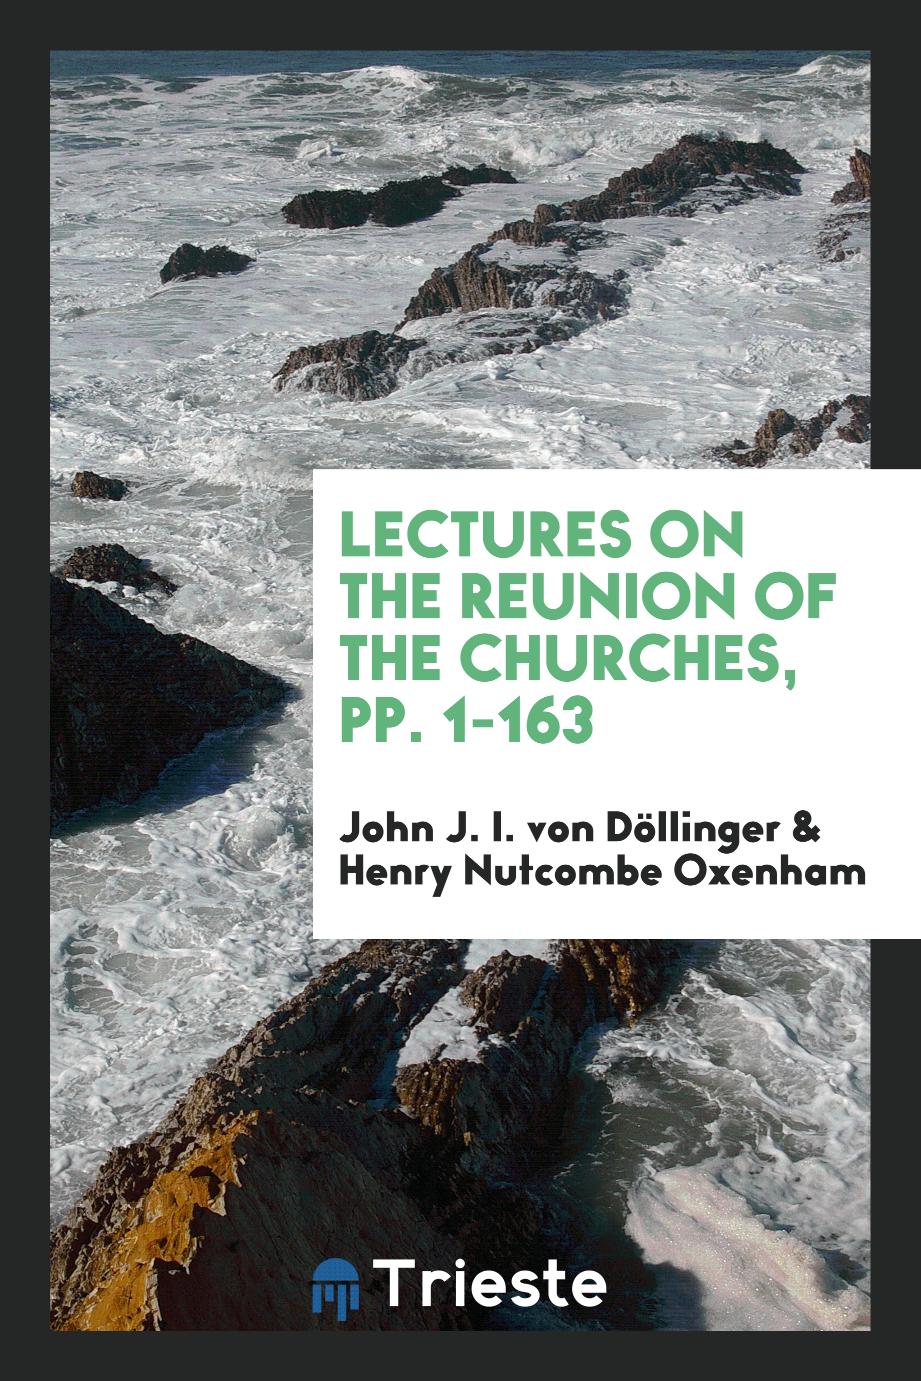 Lectures on the Reunion of the Churches, pp. 1-163